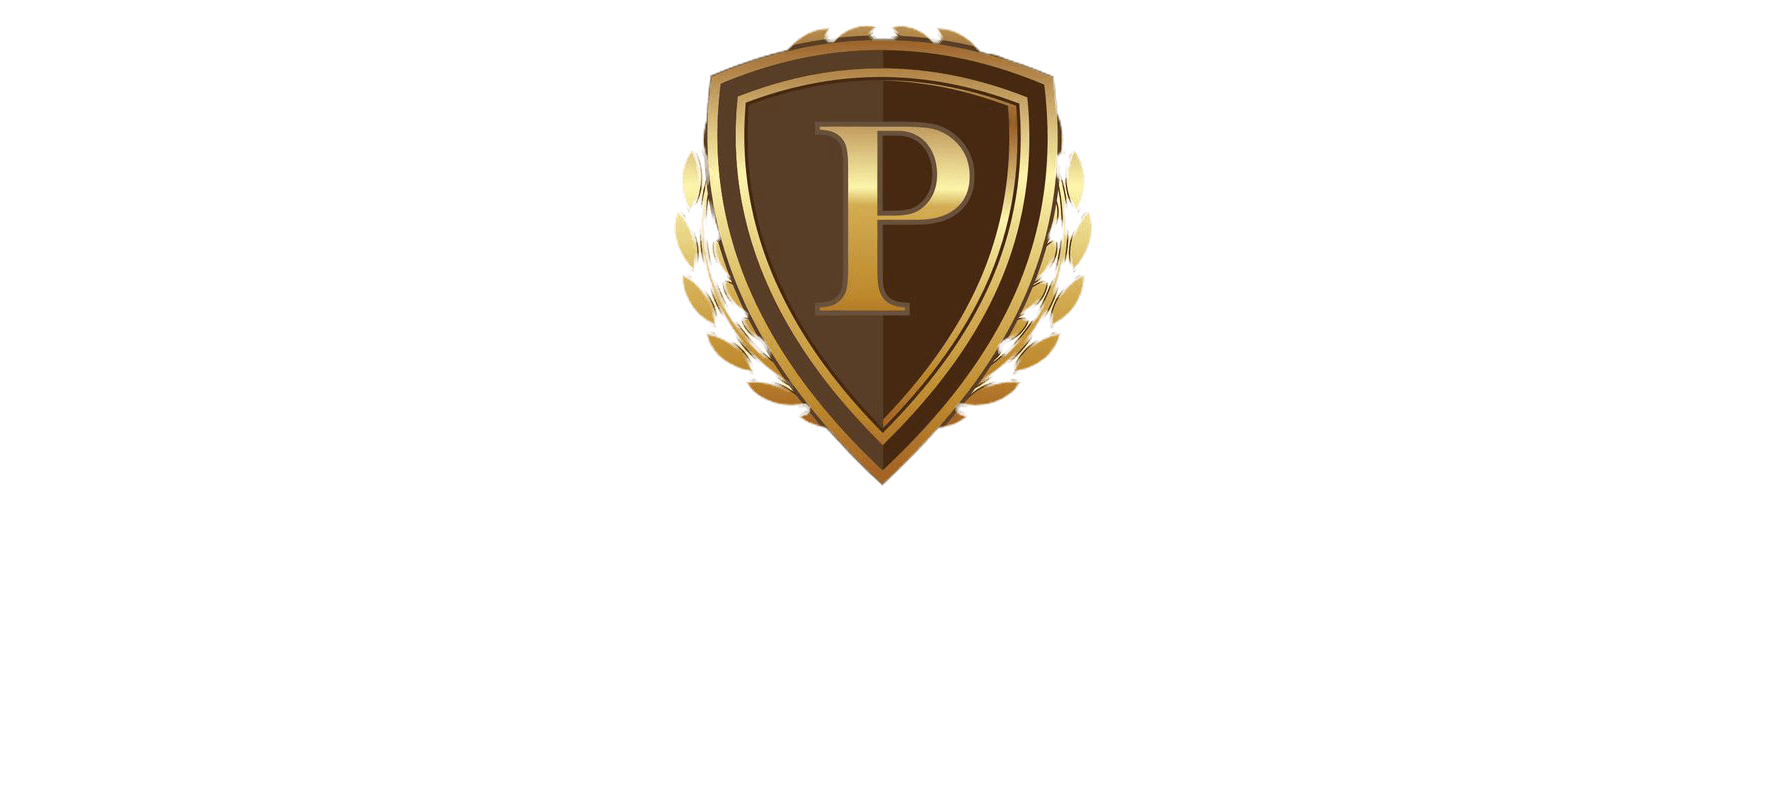 Poole - Serenity Funeral Homes and Cremation Services Logo